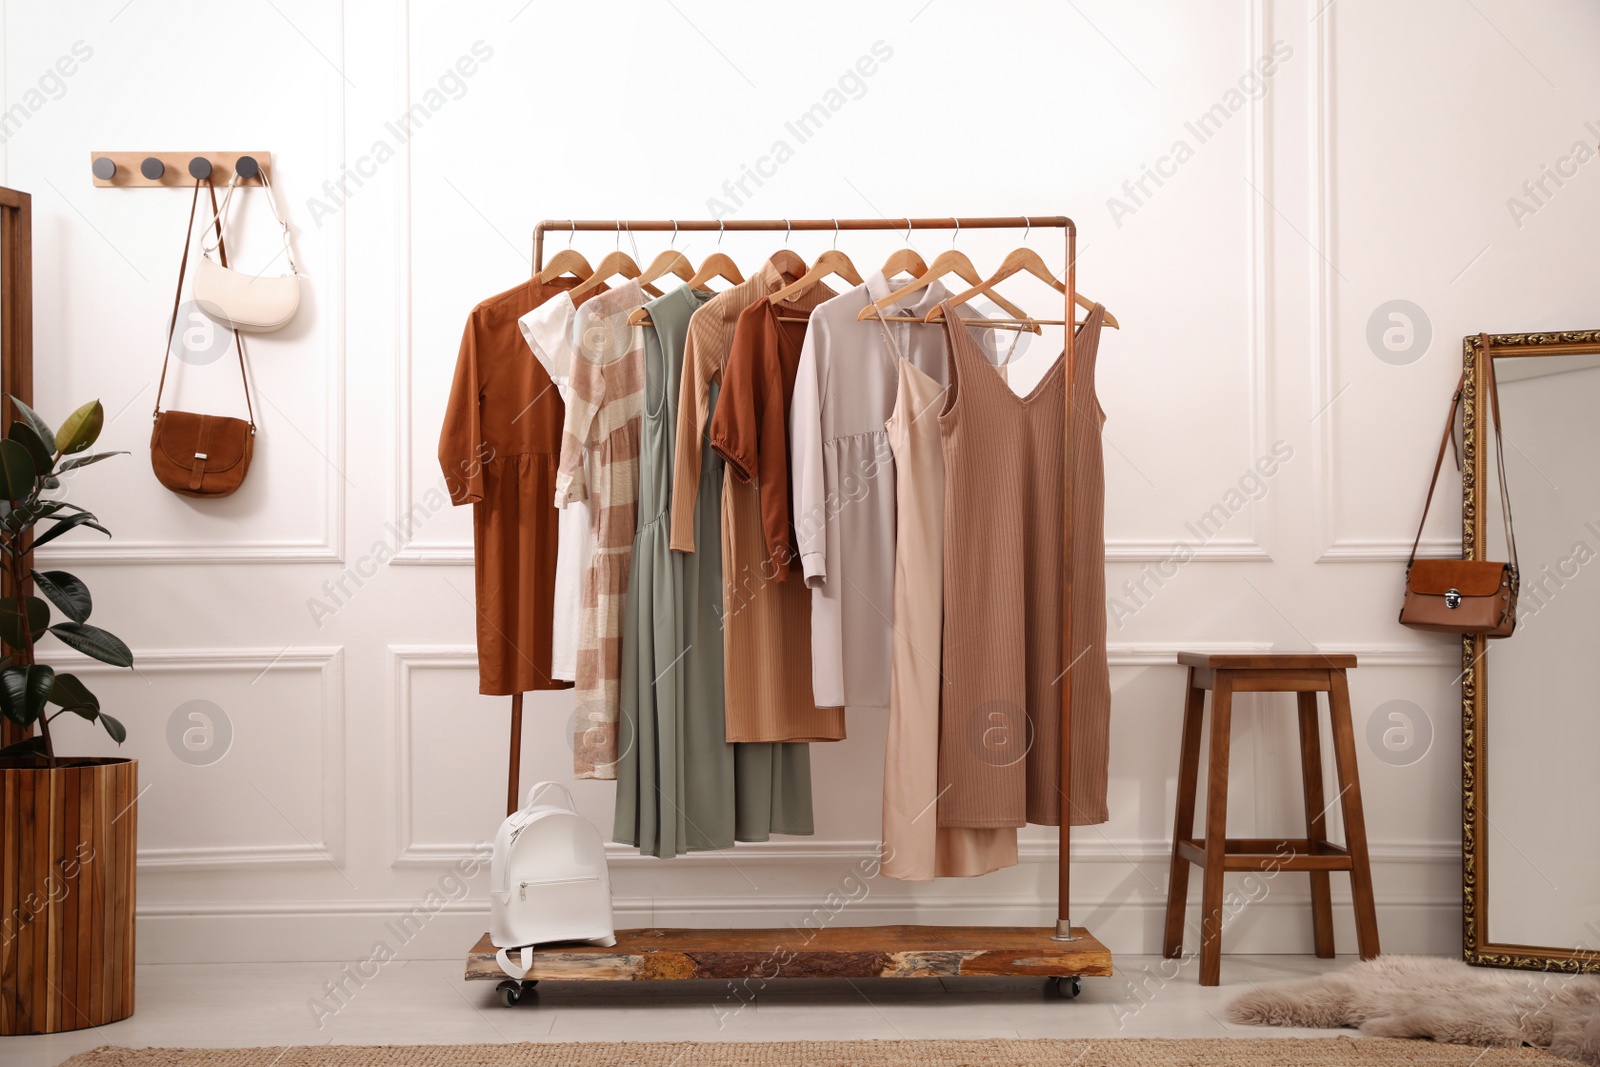 Photo of Stylish clothes hanging on rack in dressing room. Interior design